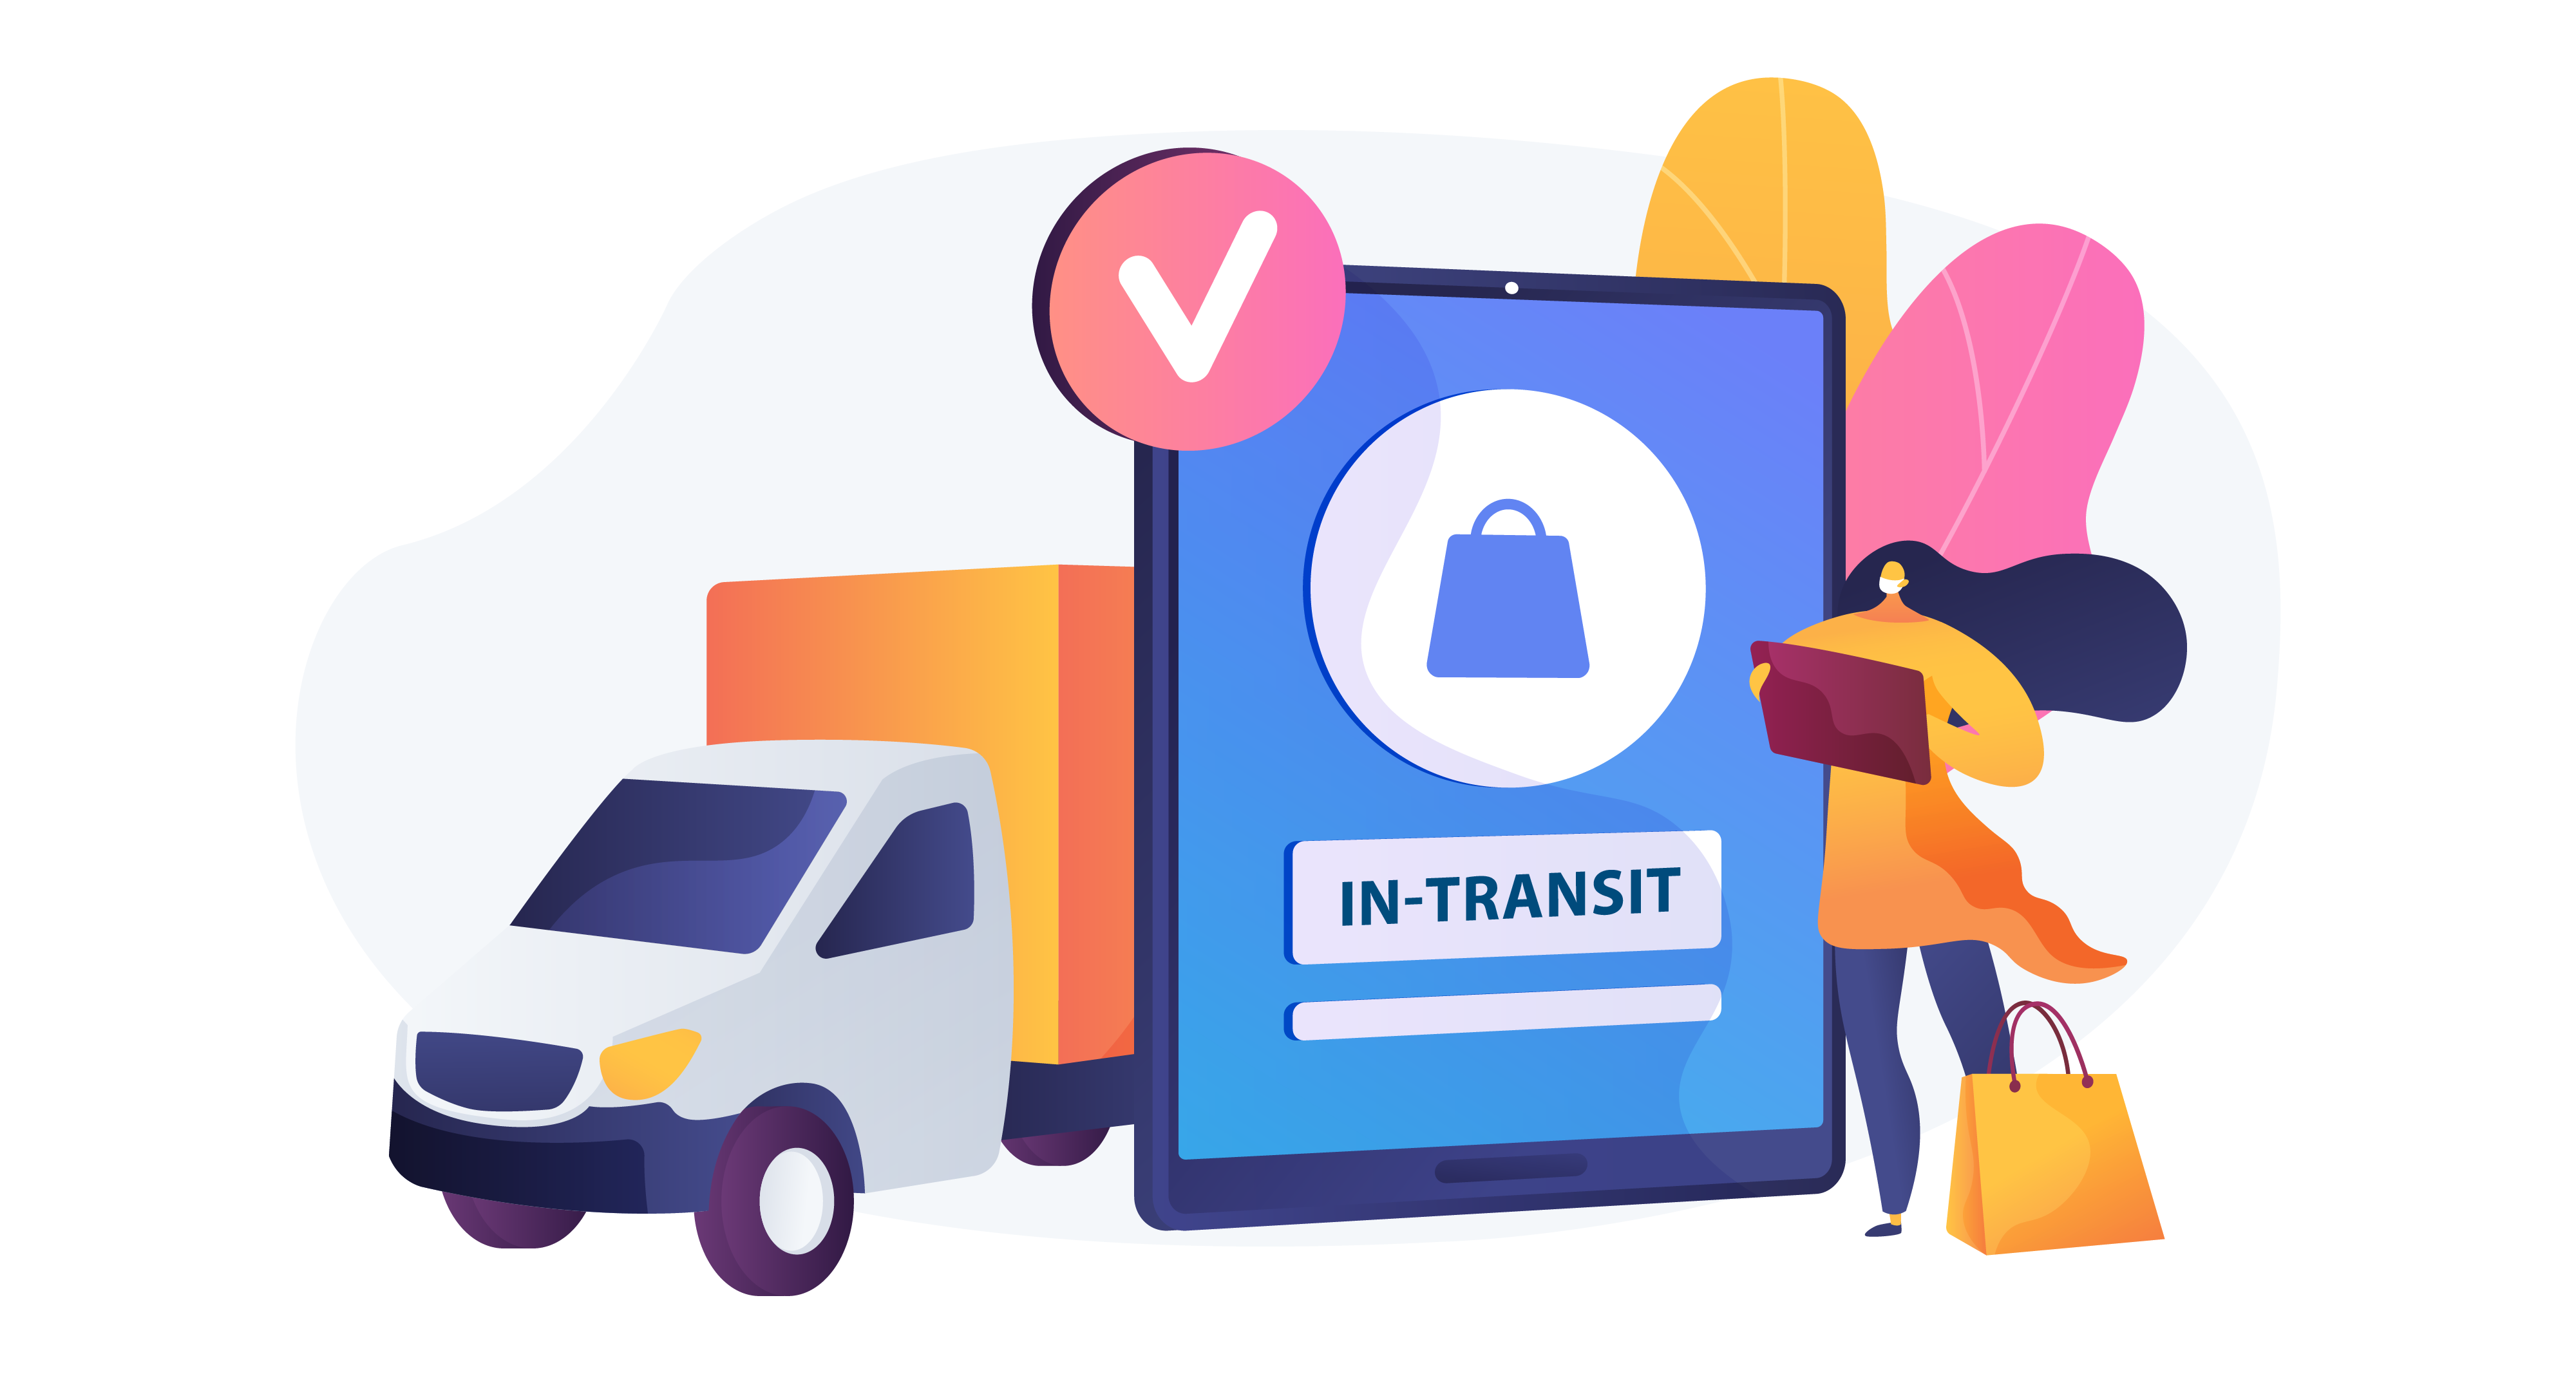 Transit meaning in parcel Parcel Tracking